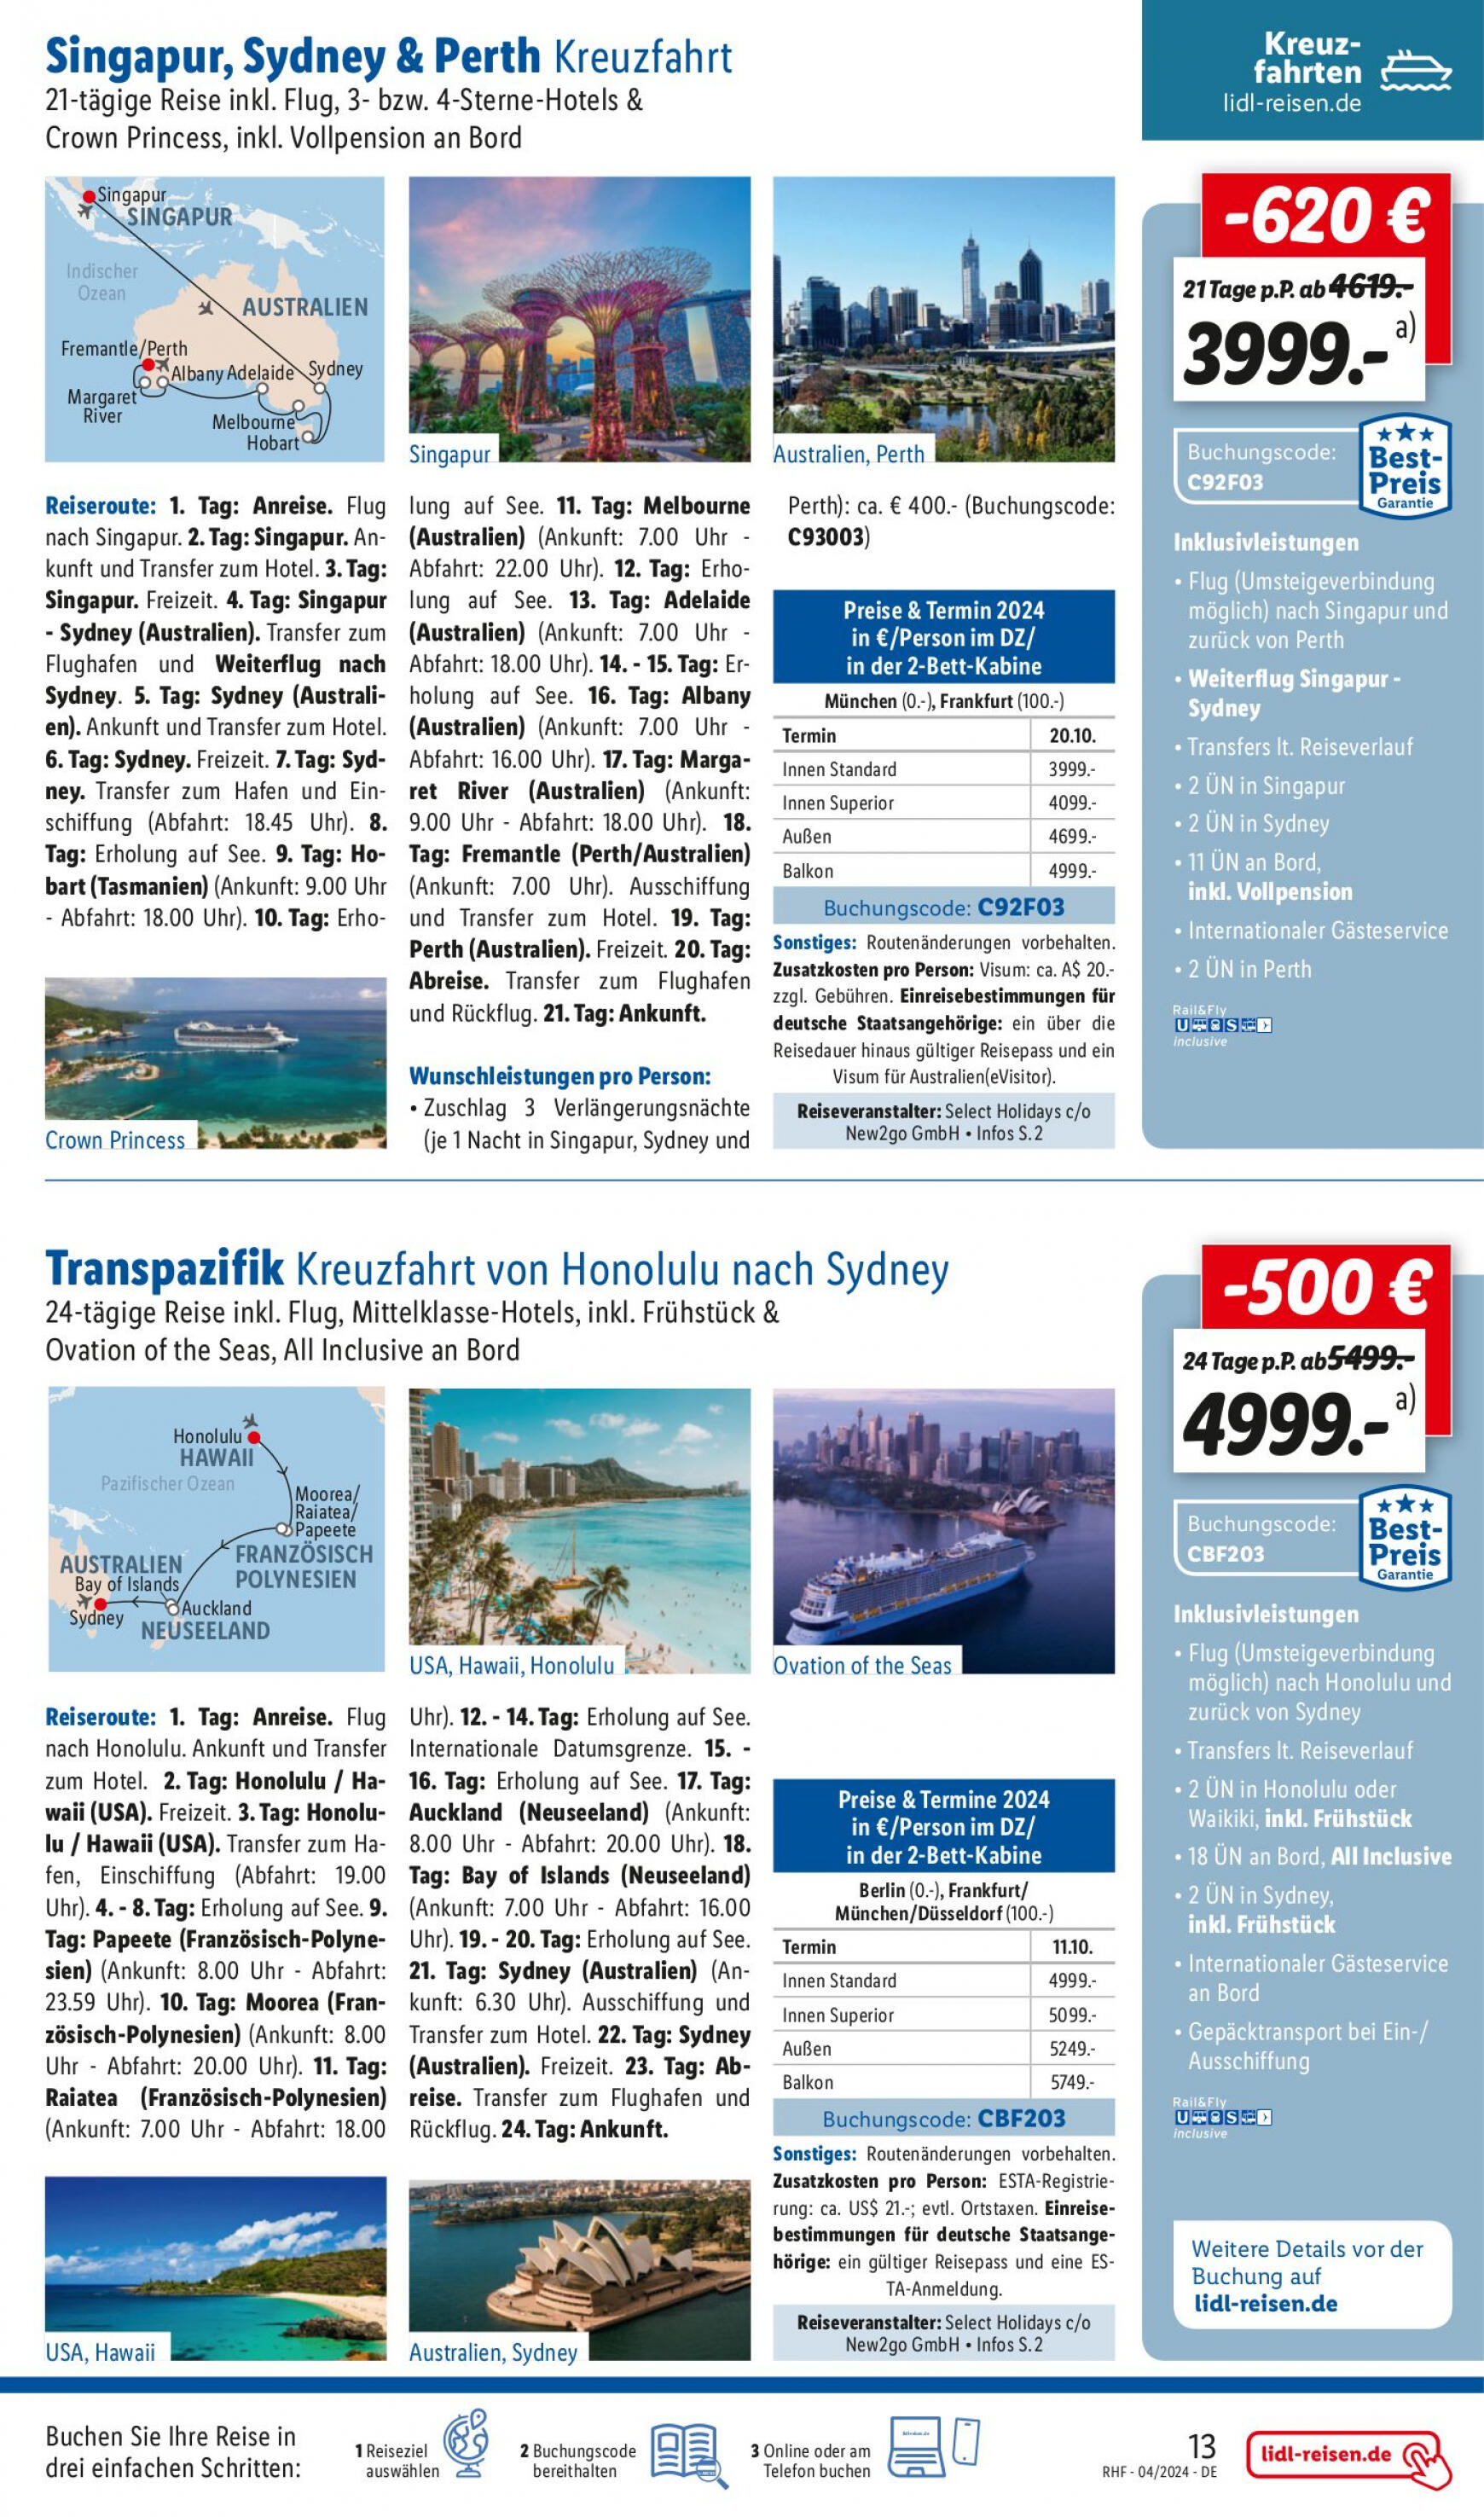 lidl - Flyer Lidl - April Reise-Highlights aktuell 27.03. - 30.04. - page: 13